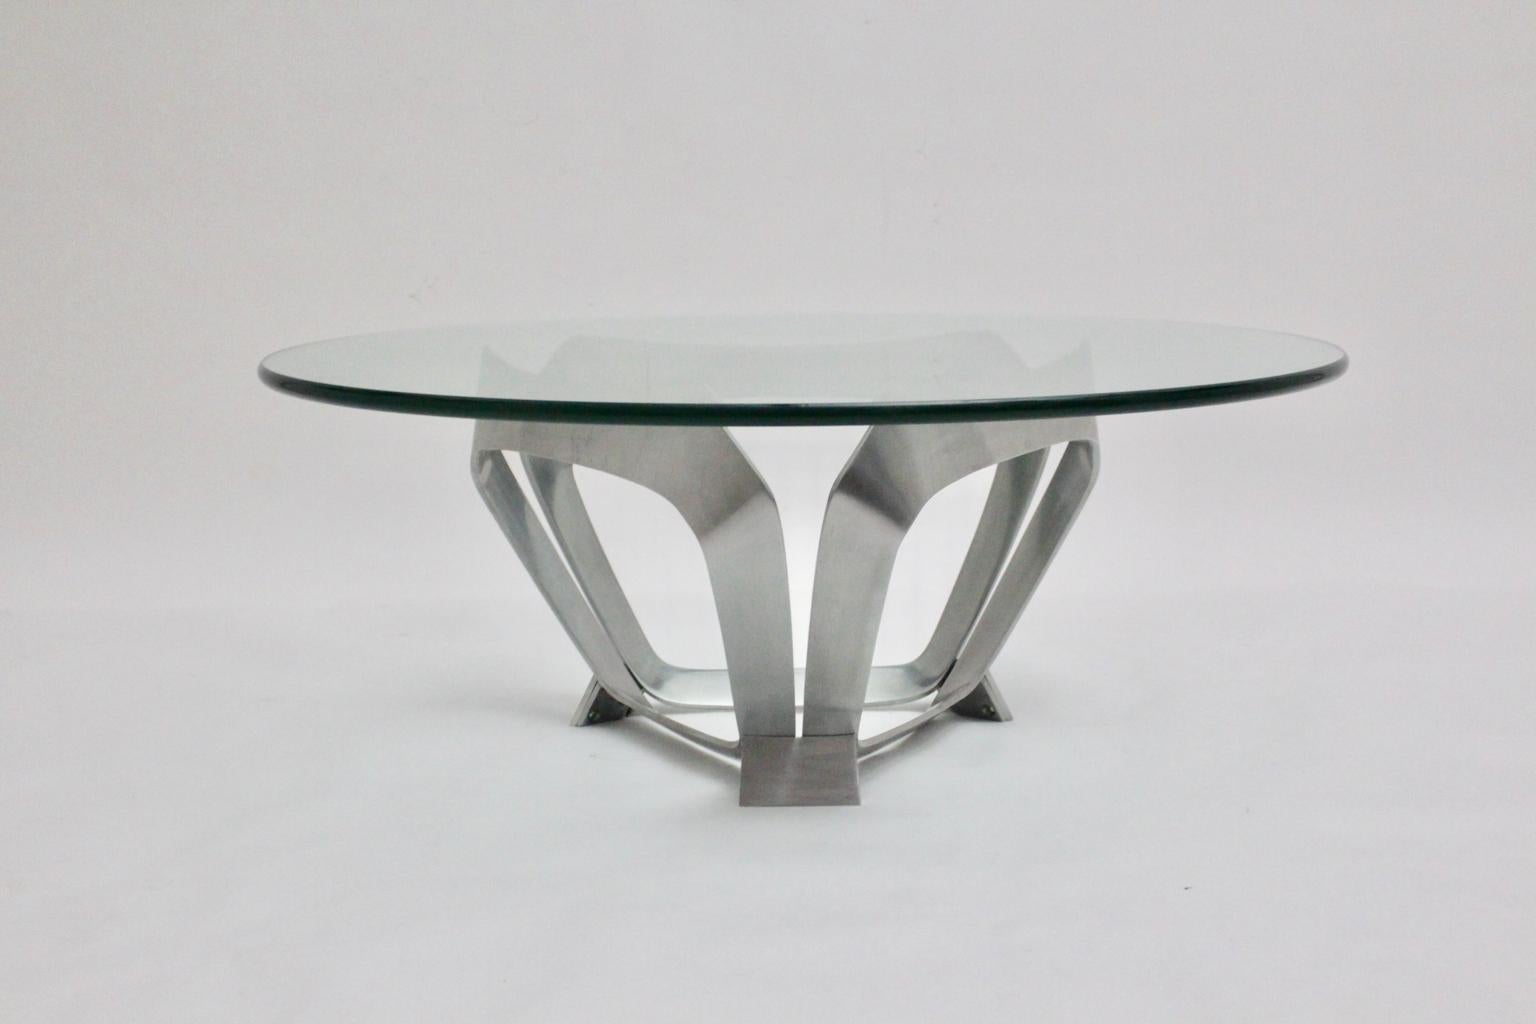 This presented Mid-Century Modern vintage coffee table was designed by Knut Hesterberg 1960s for Ronald Schmitt Germany. The coffee table shows an aluminum base in triangle shape with a clear glass plate with a thickness of 2 cm and polished